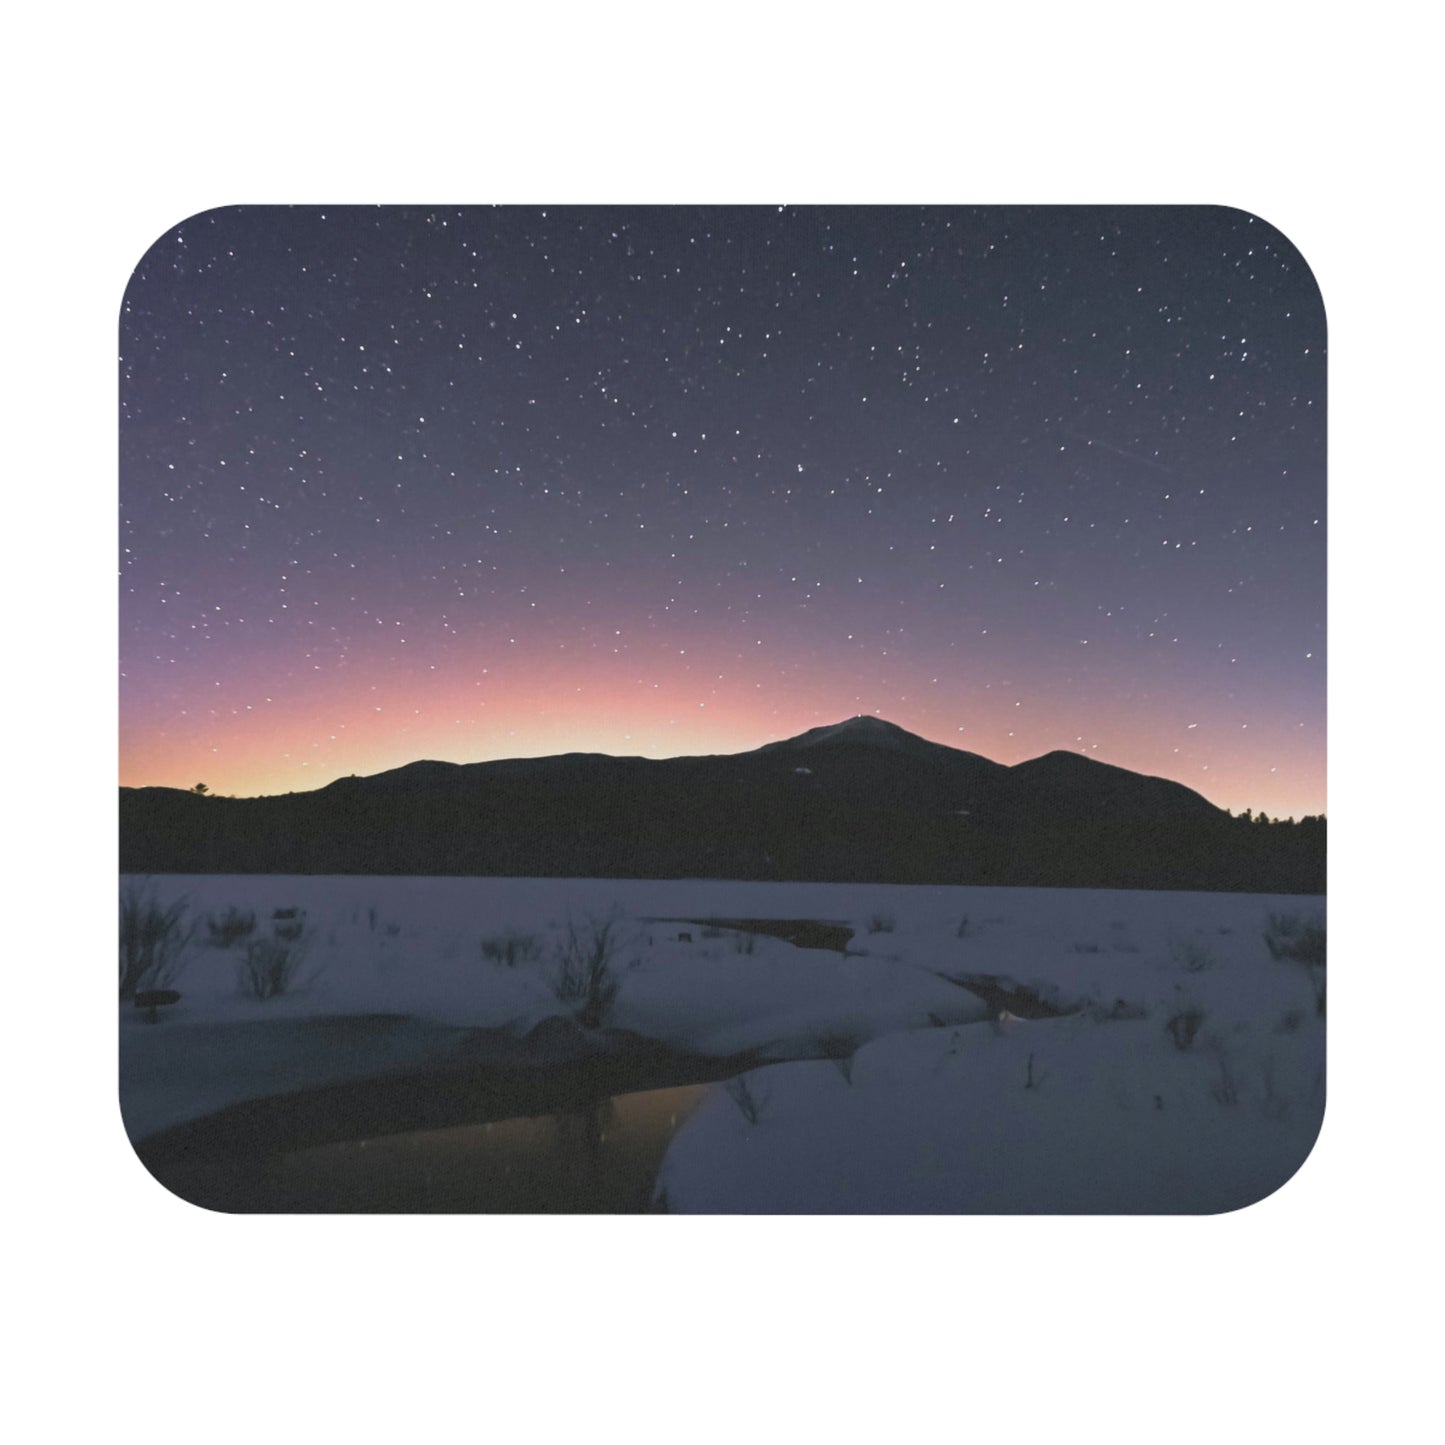 Starlit Aurora over Whiteface Mt. Mouse Pad